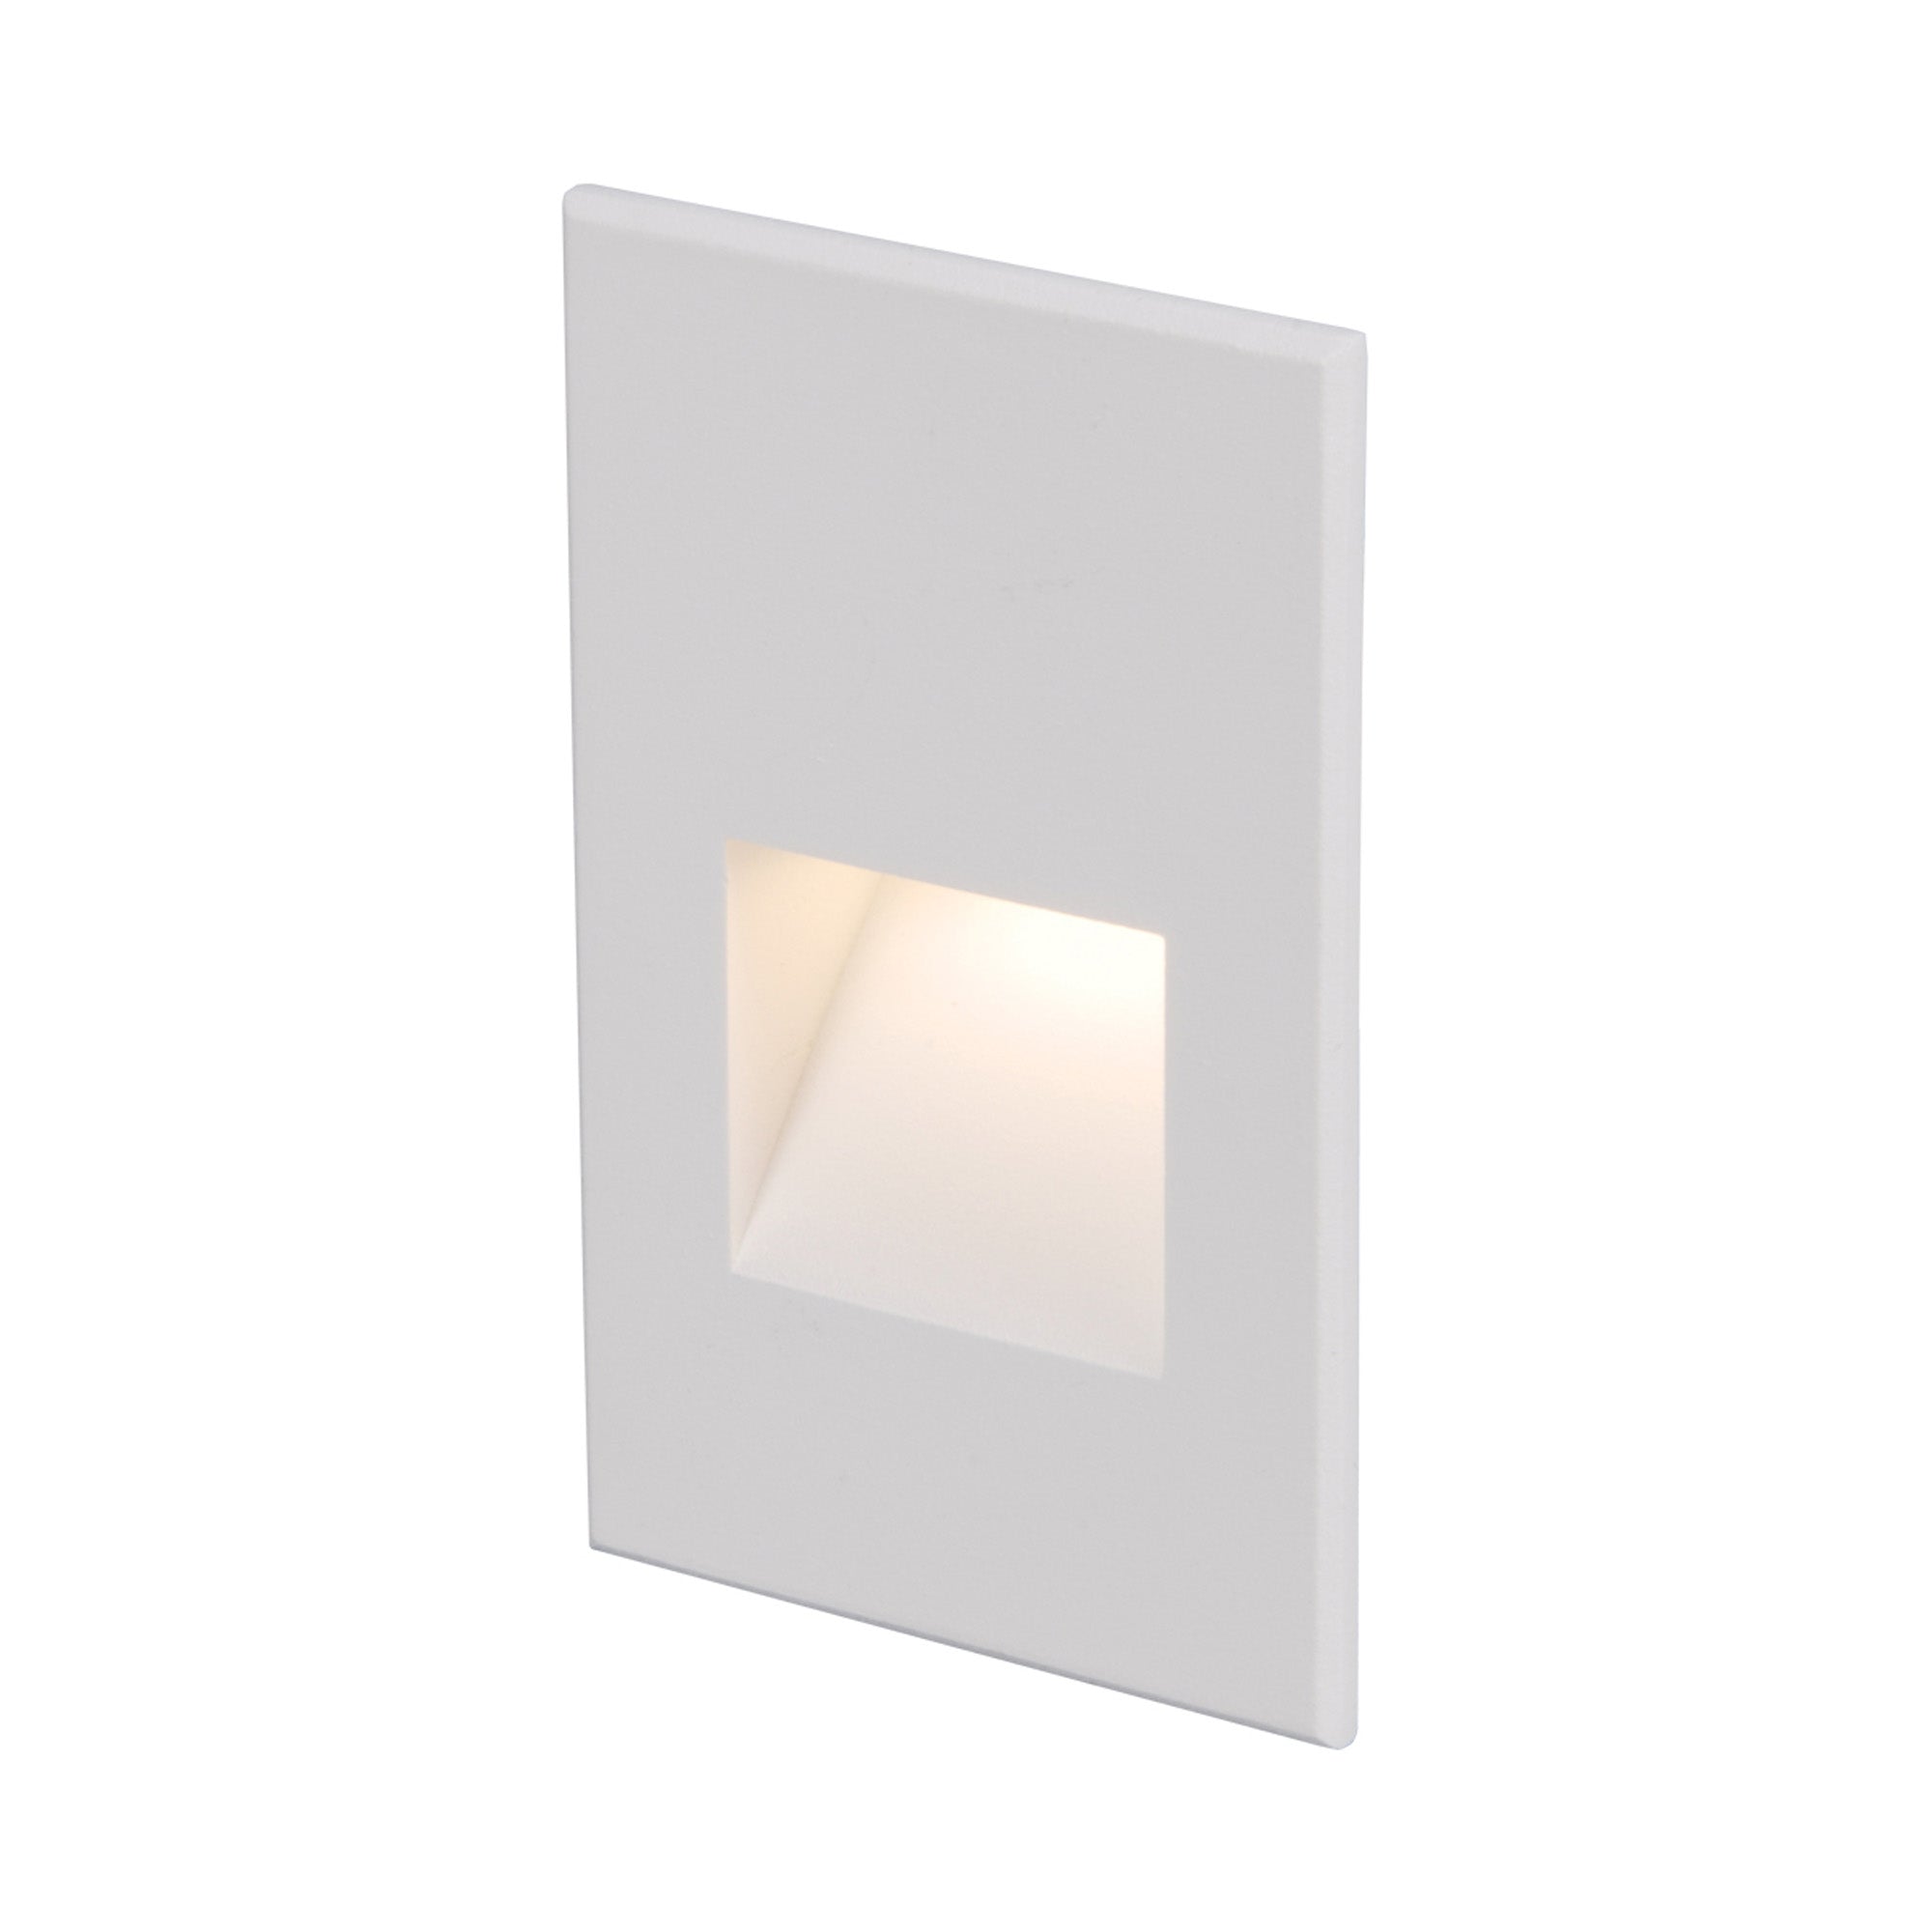 LED 12V Vertical Indoor/Outdoor Step and Wall Light